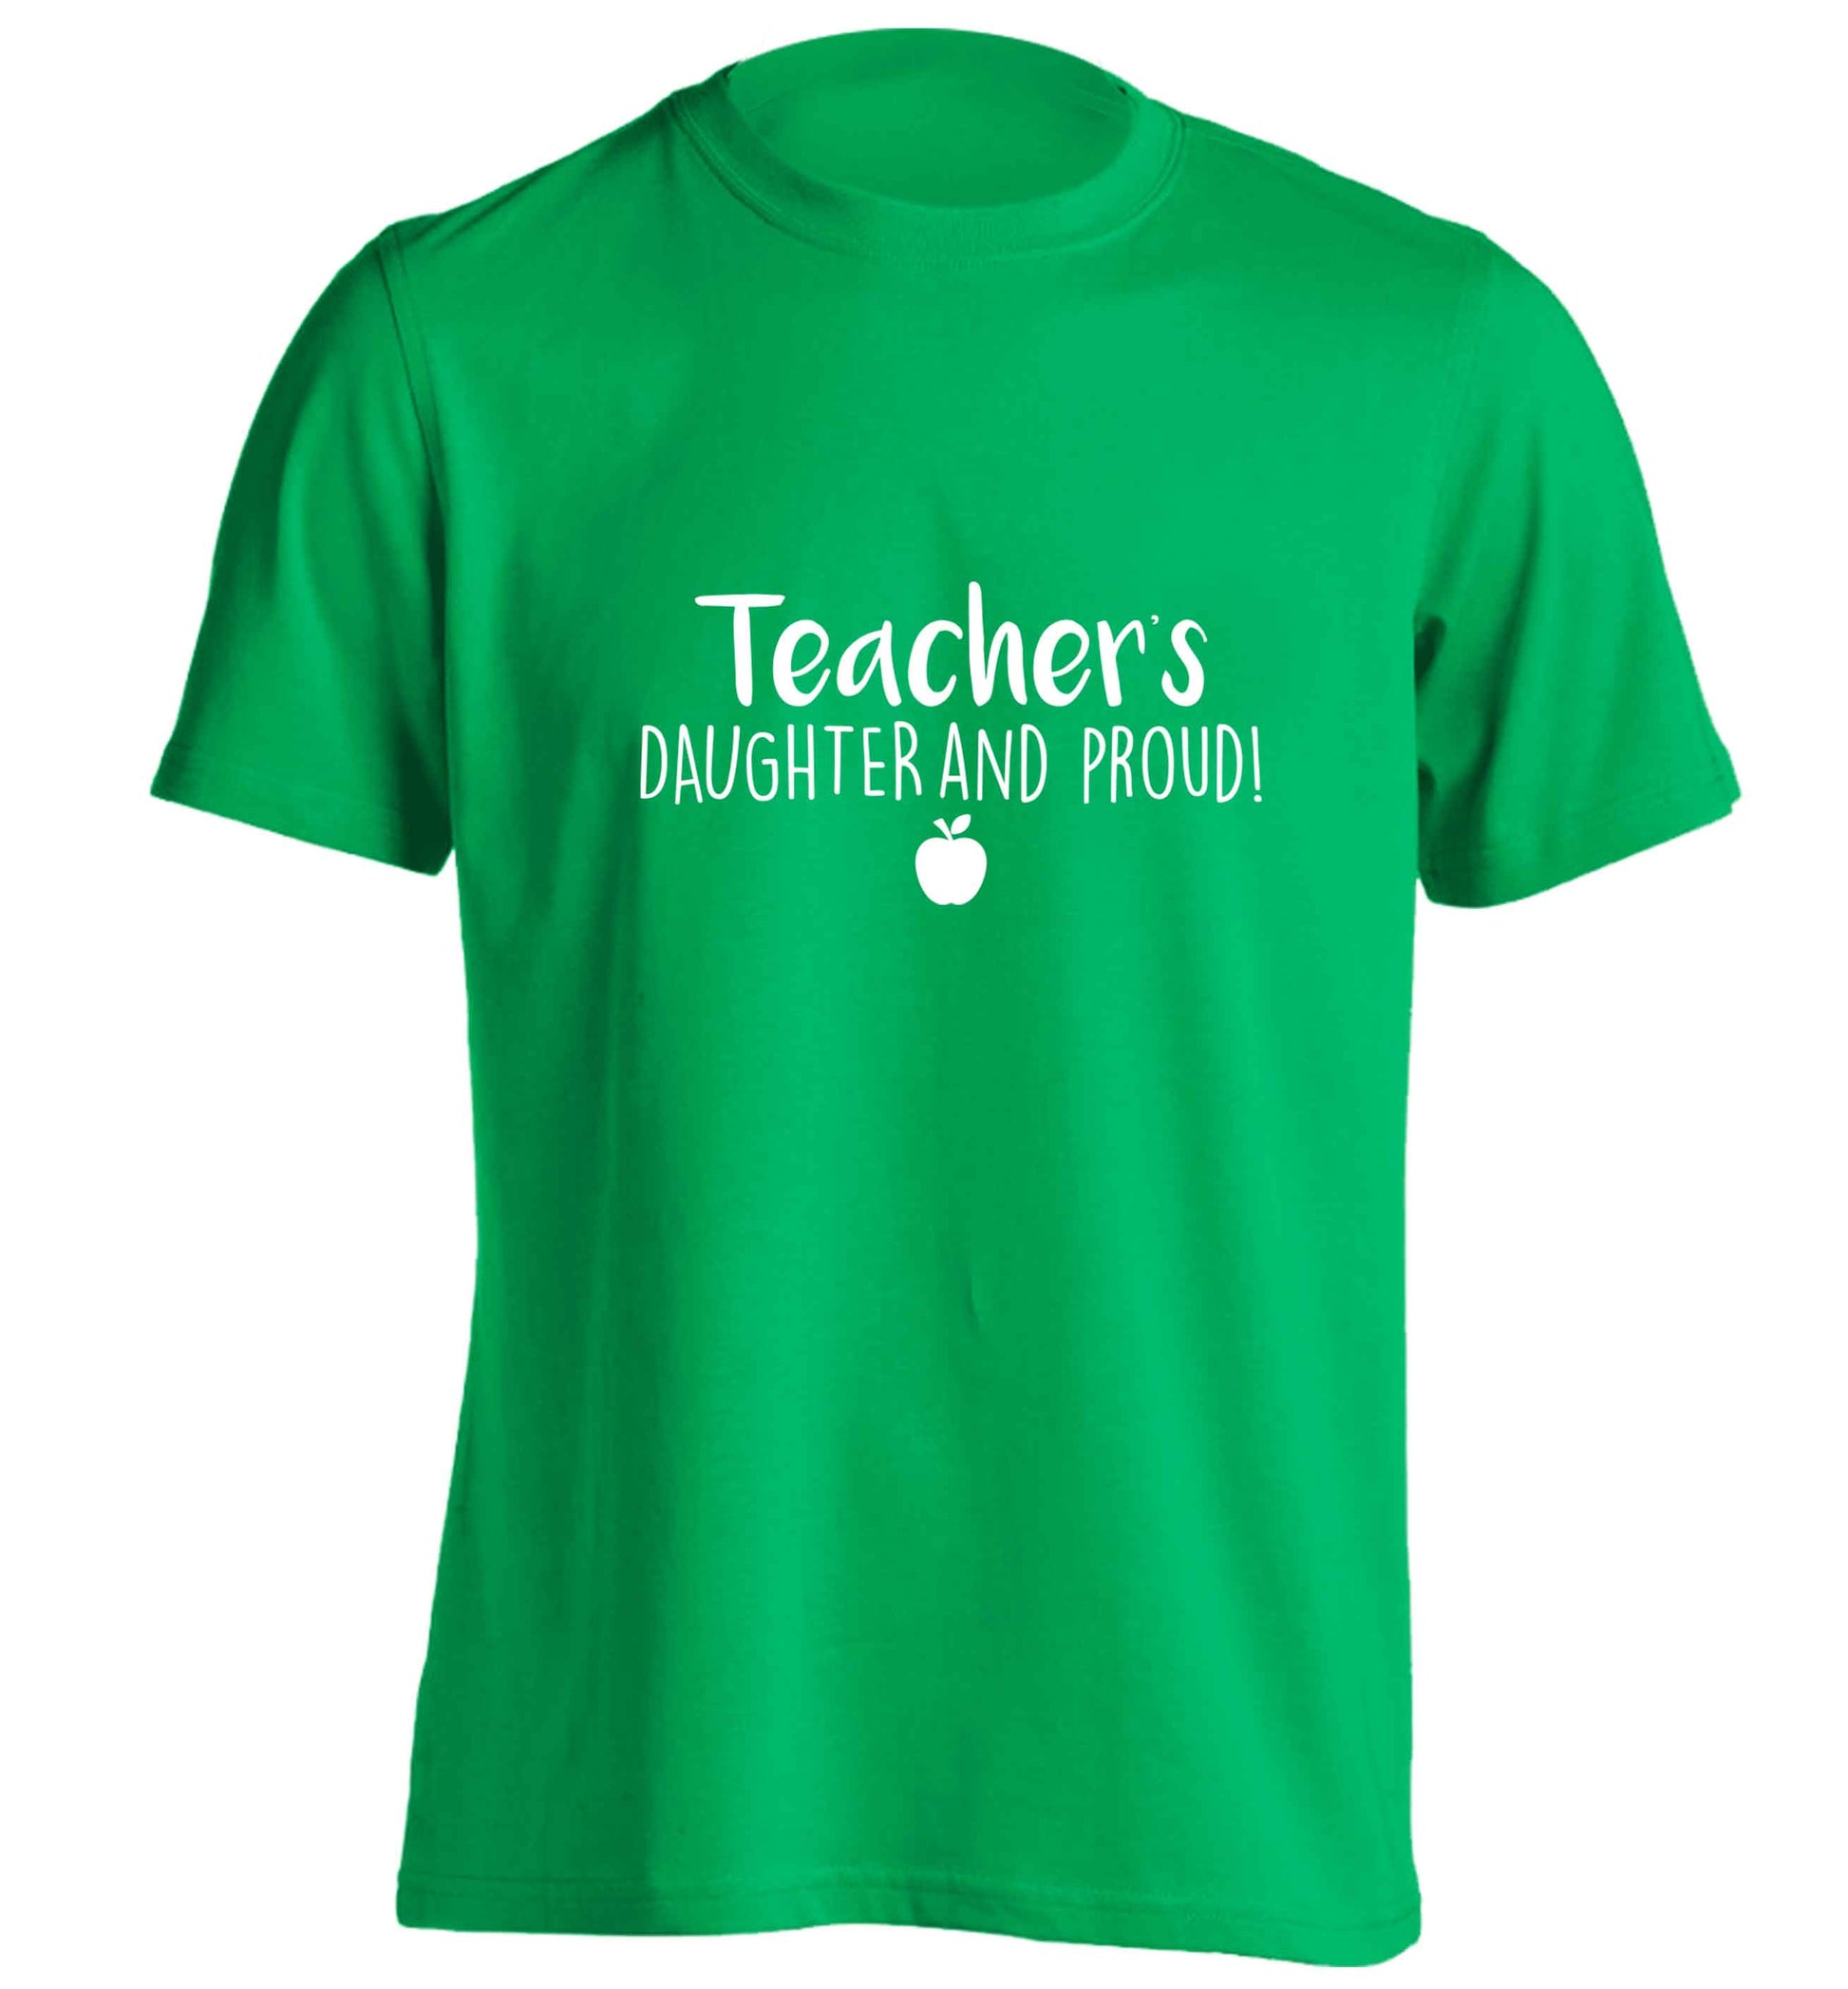 Teachers daughter and proud adults unisex green Tshirt 2XL